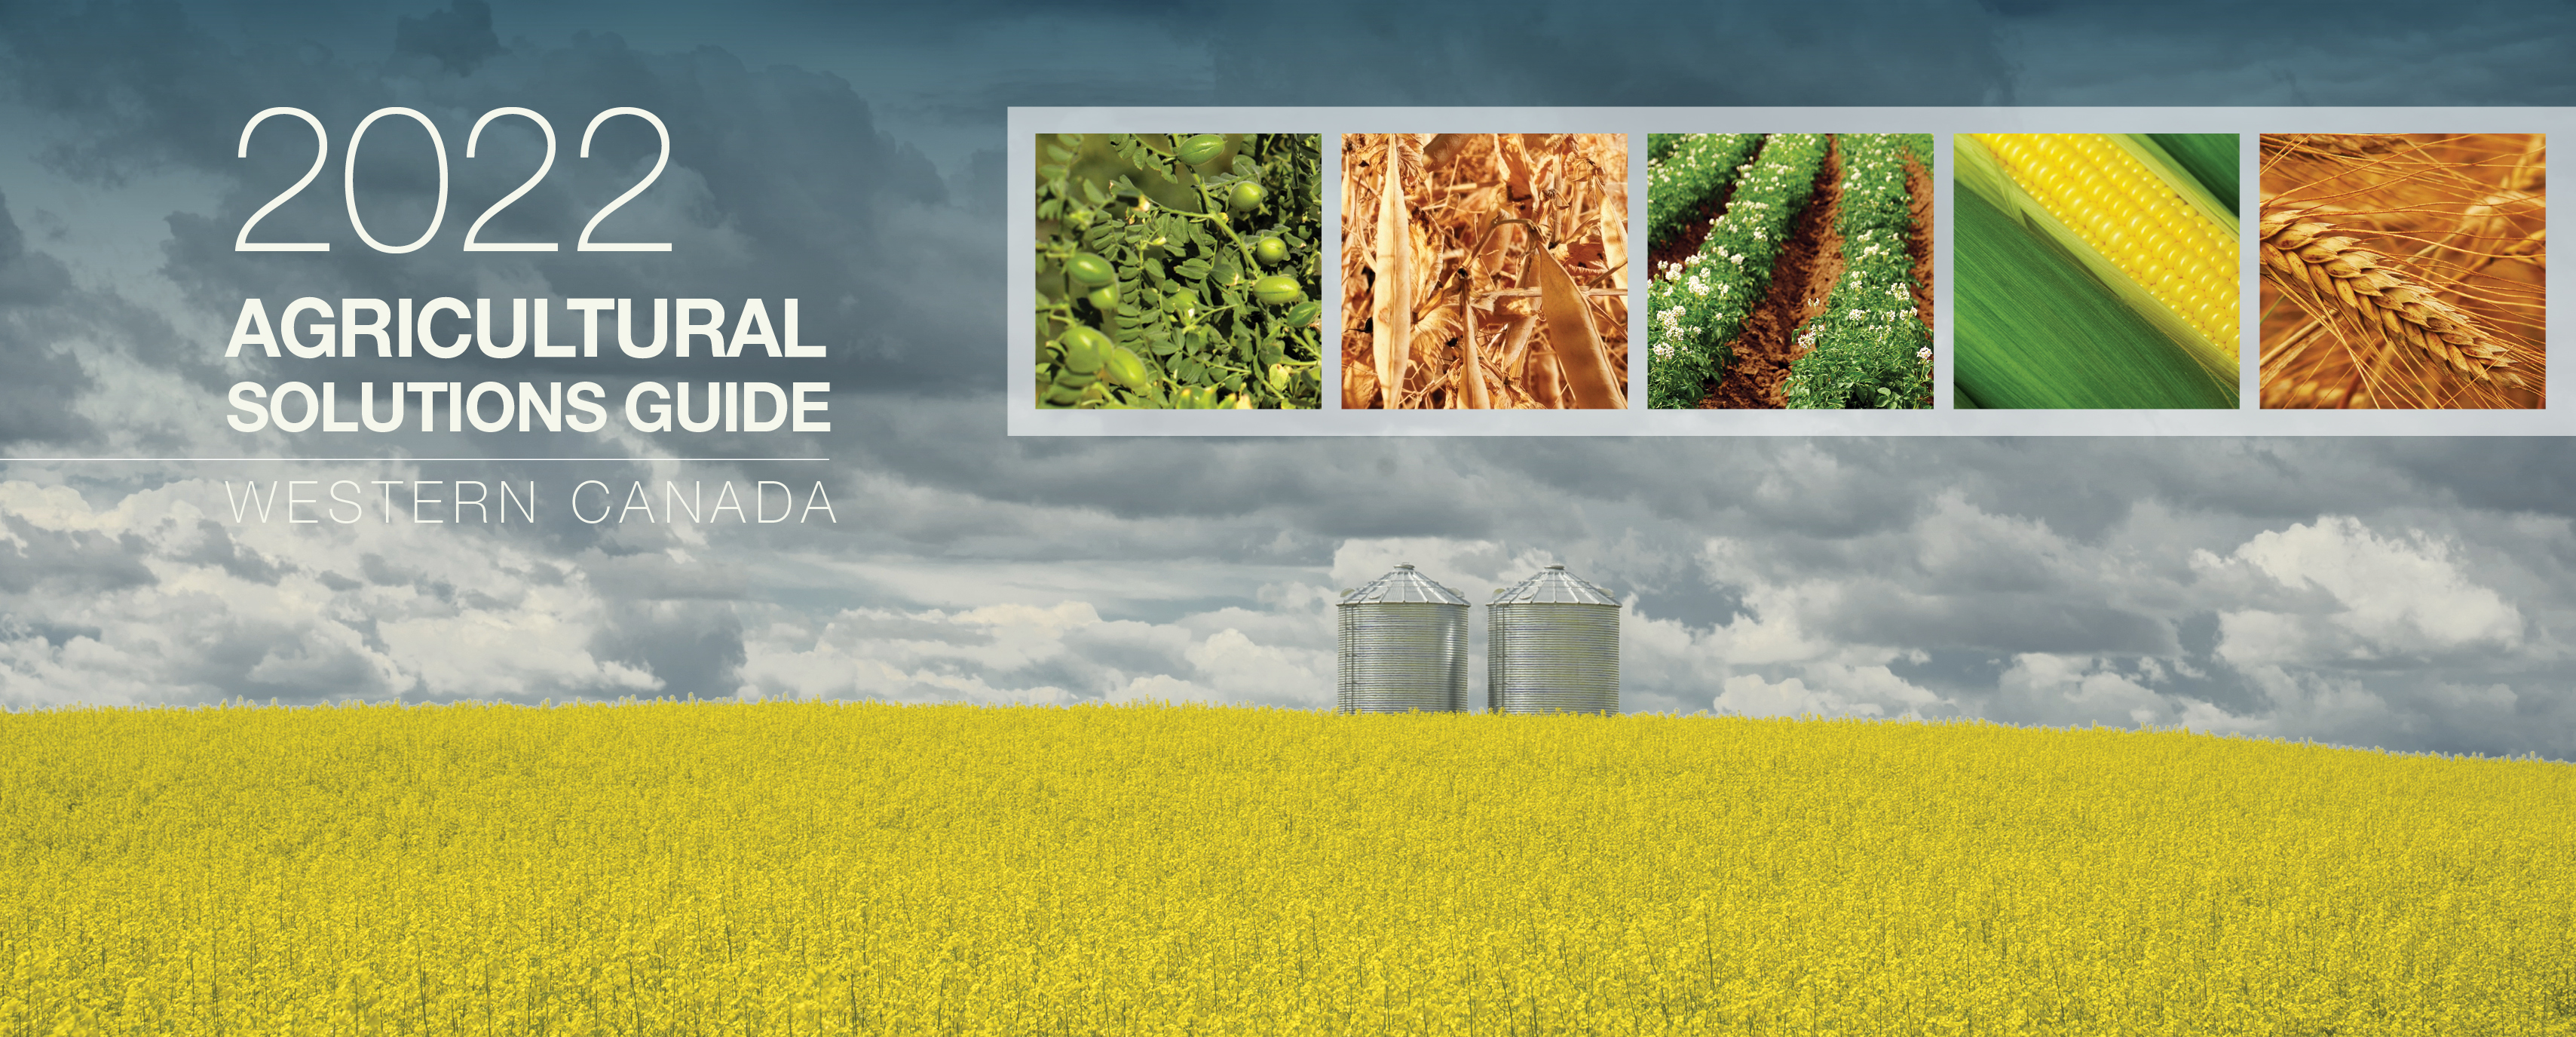 2022 West Crop Protection Guide